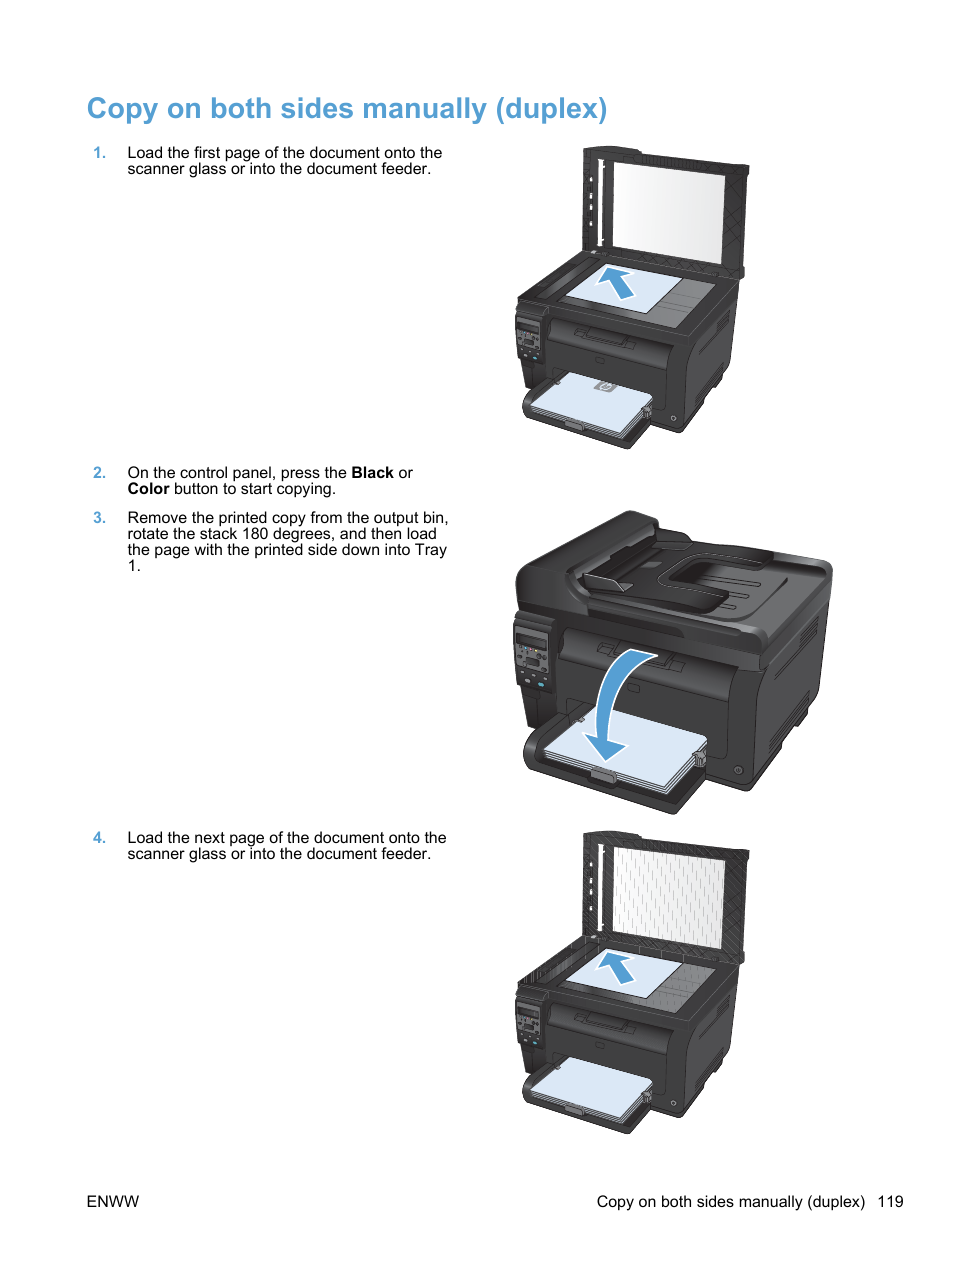 Copy on both sides manually (duplex) | HP LaserJet Pro 100 color MFP M175nw  User Manual | Page 133 / 220